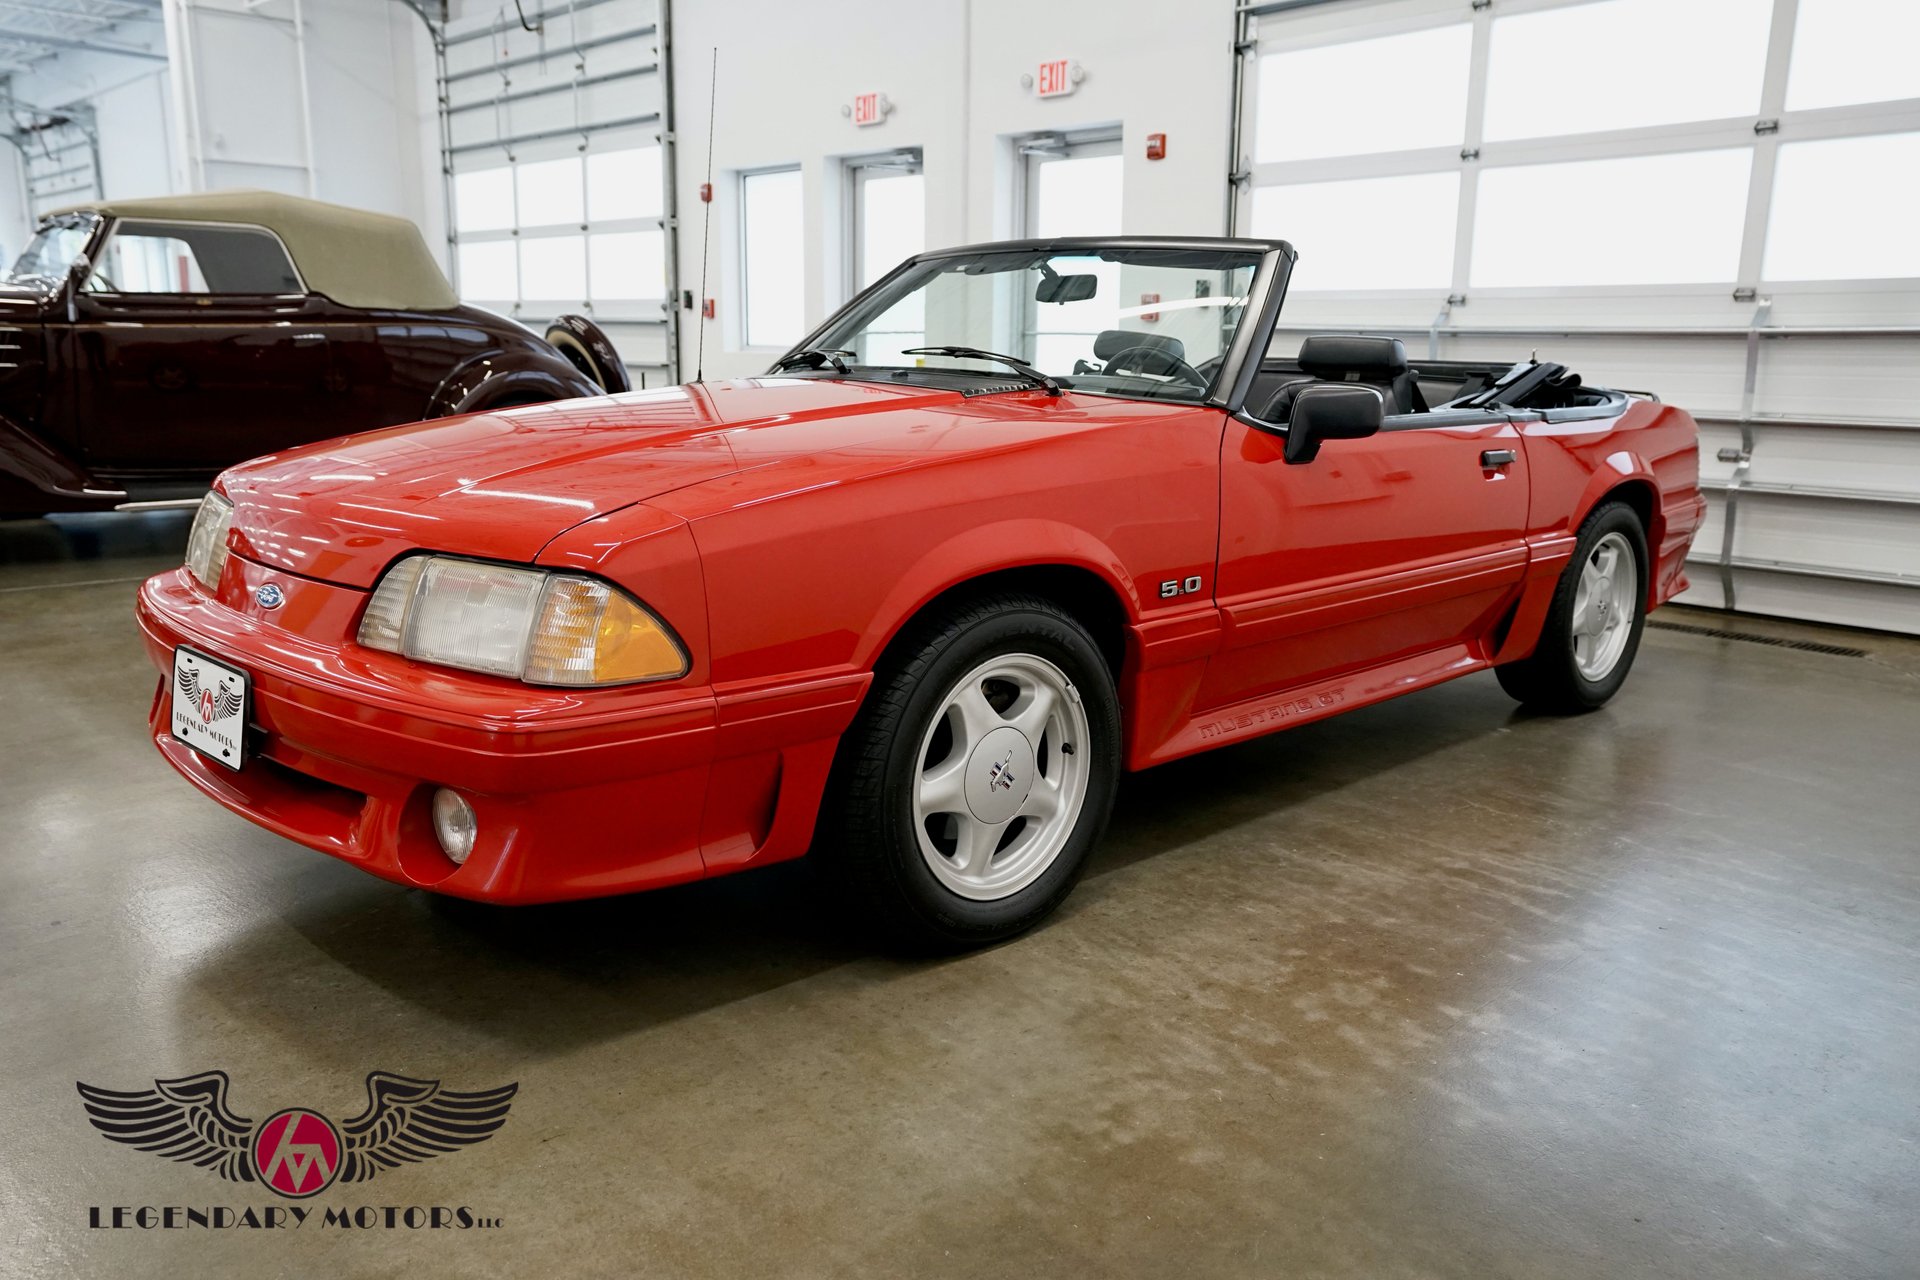 1991 Ford Mustang GT Convertible | Motors - Cars, Muscle Cars, Hot Rods & Antique Cars - Rowley, MA